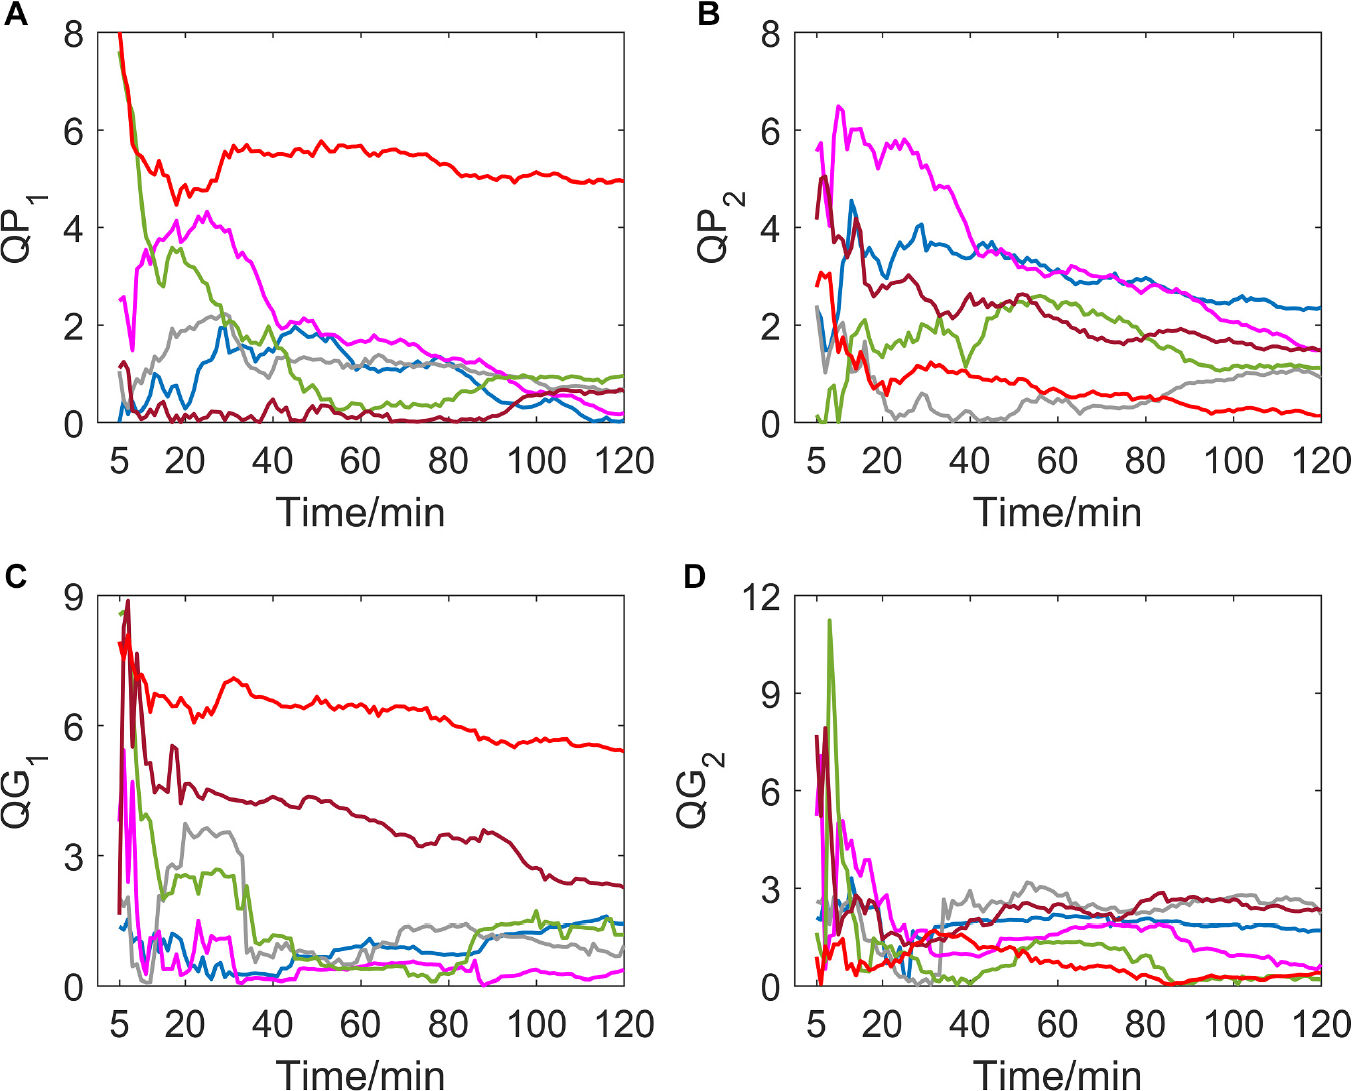 Frontiers  Assessment of time irreversibility in a time series